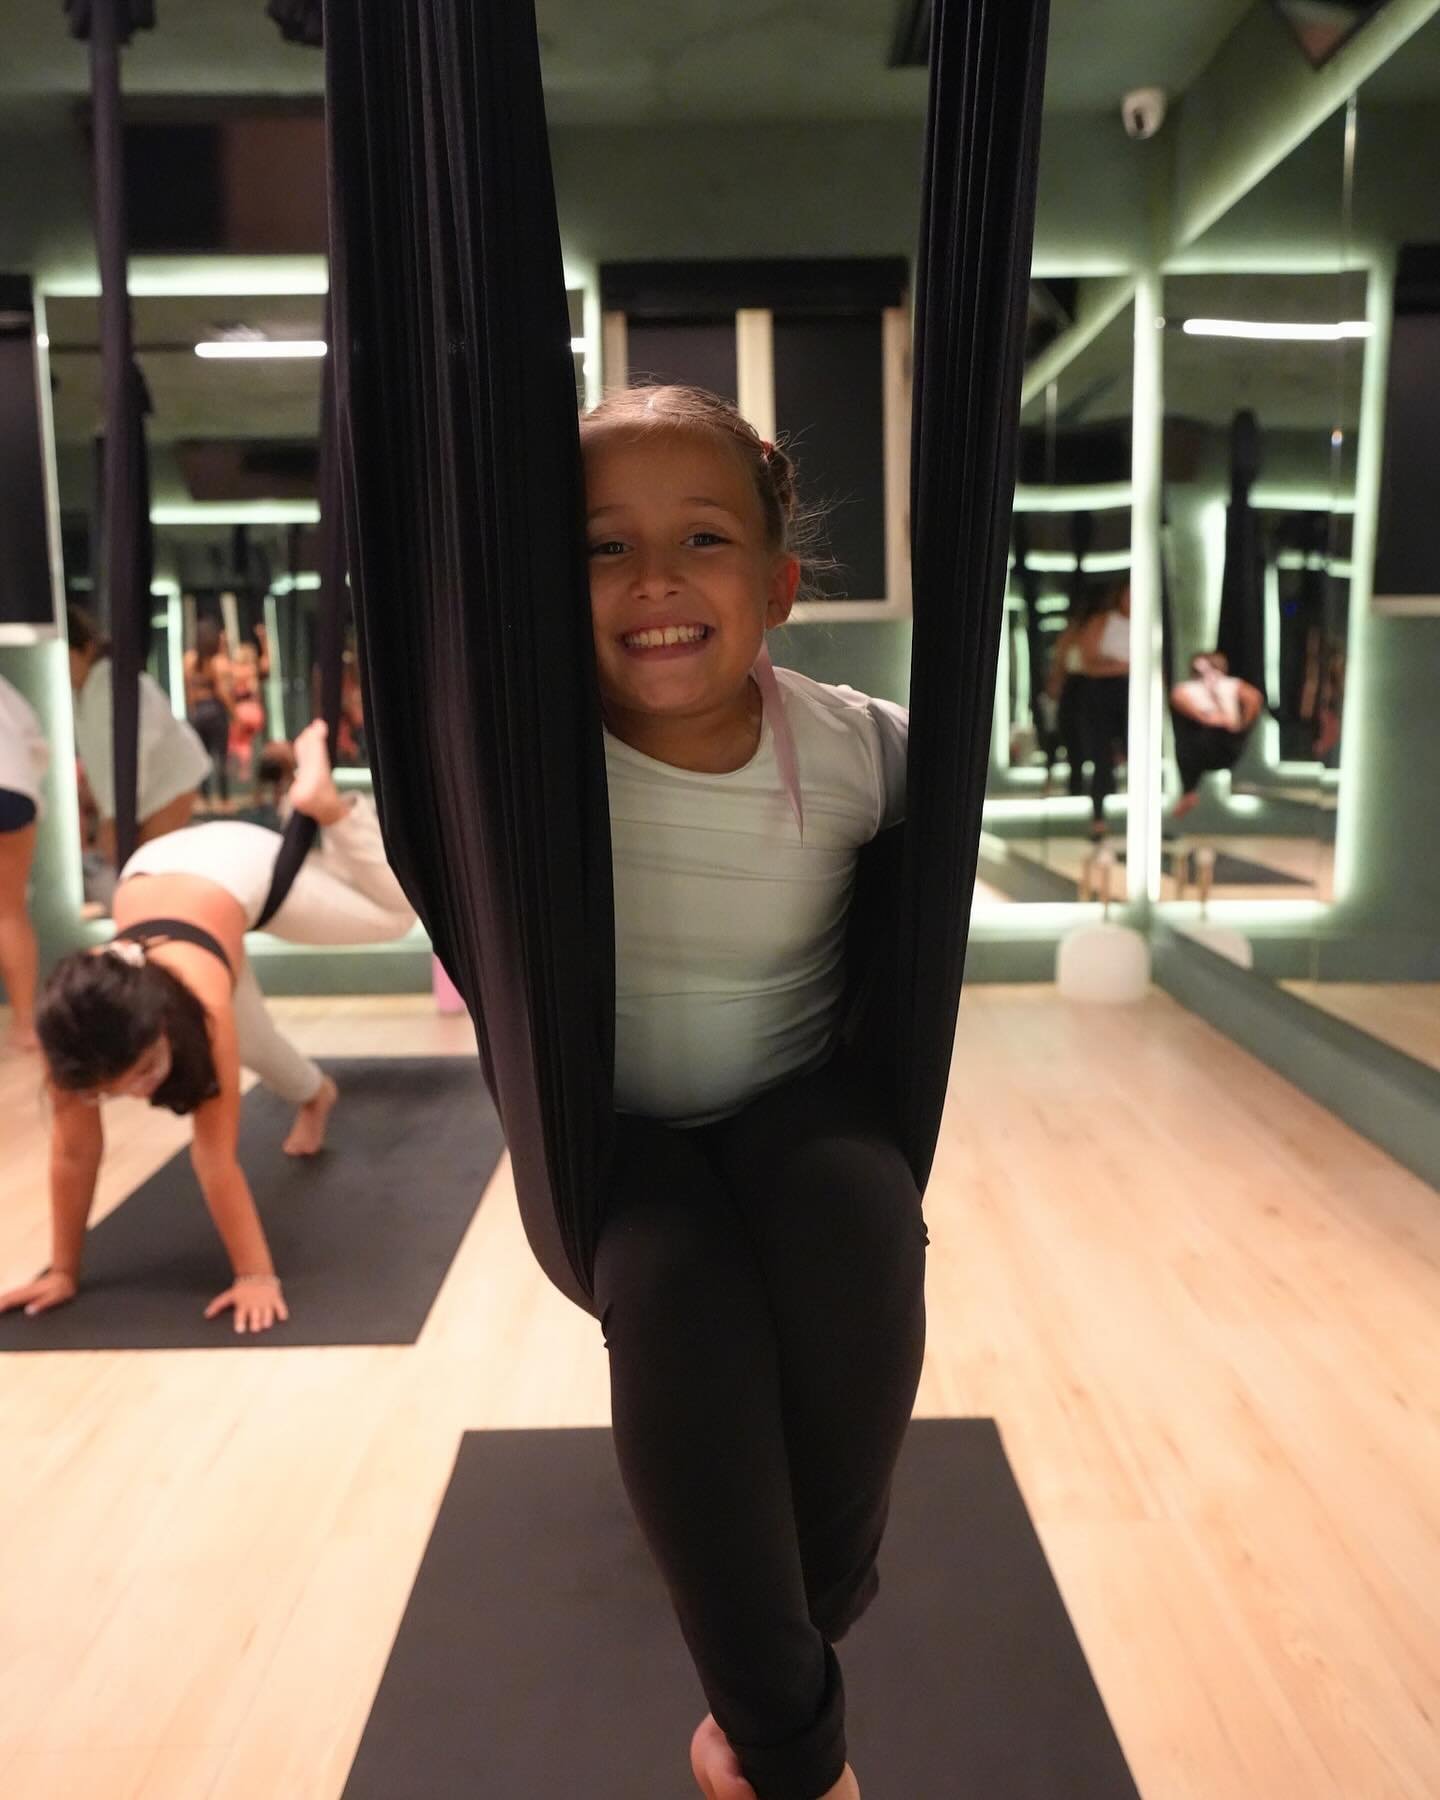 🪽Watch our little flyers soar! 🤸 Introducing our NEW Aerial Kids Summer Camp, starting July 29th until August 9th! 

Join us for 2 weeks of high-flying fun, learning, and weekly performances that will amaze and inspire! Each session runs from 3:30-